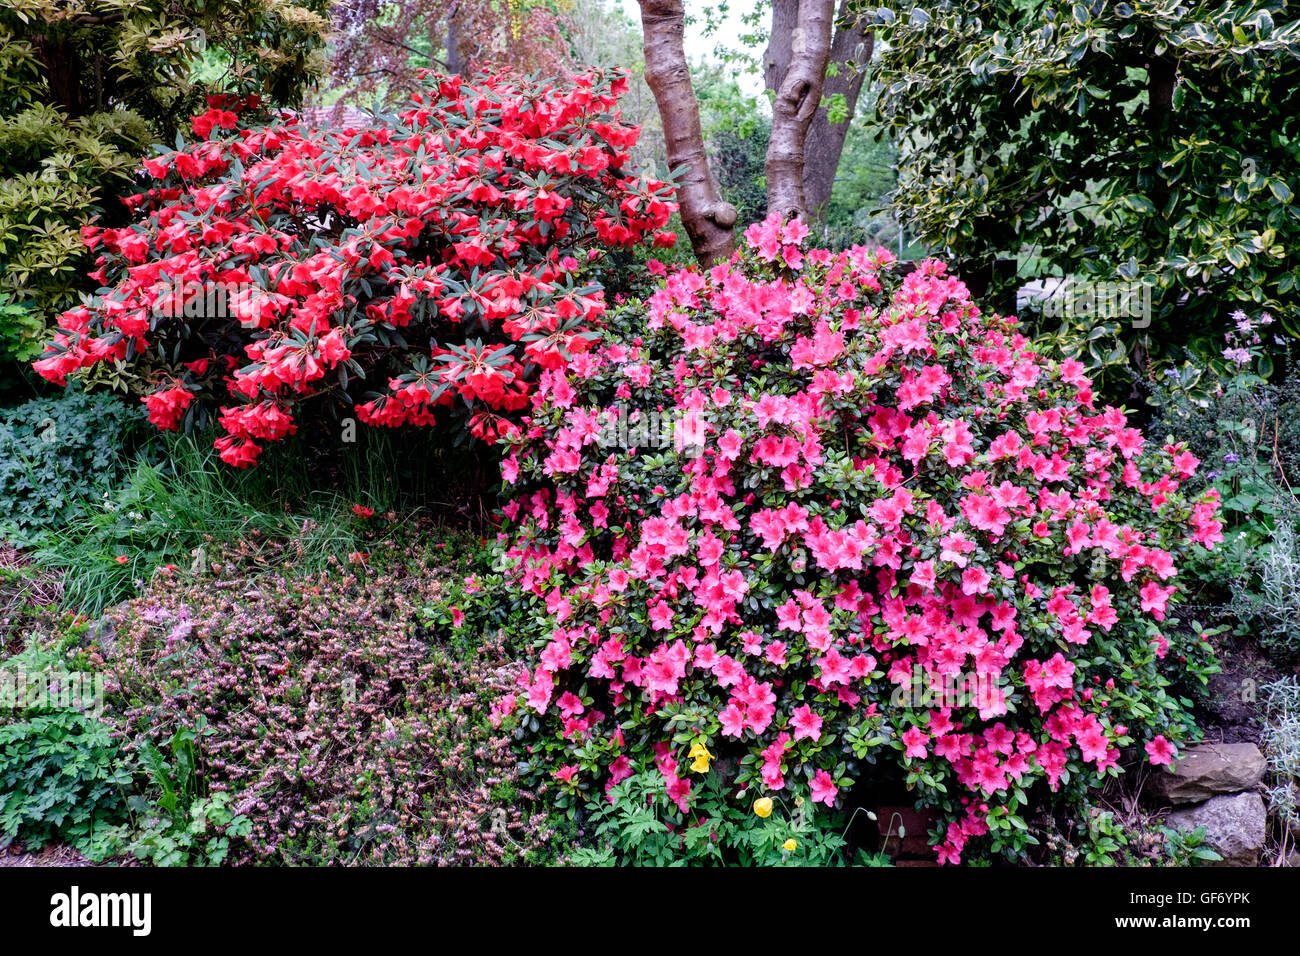 Red Rhododendron And Pink Azalea Bush In Front Garden Of House Uk Stock Photo Alamy